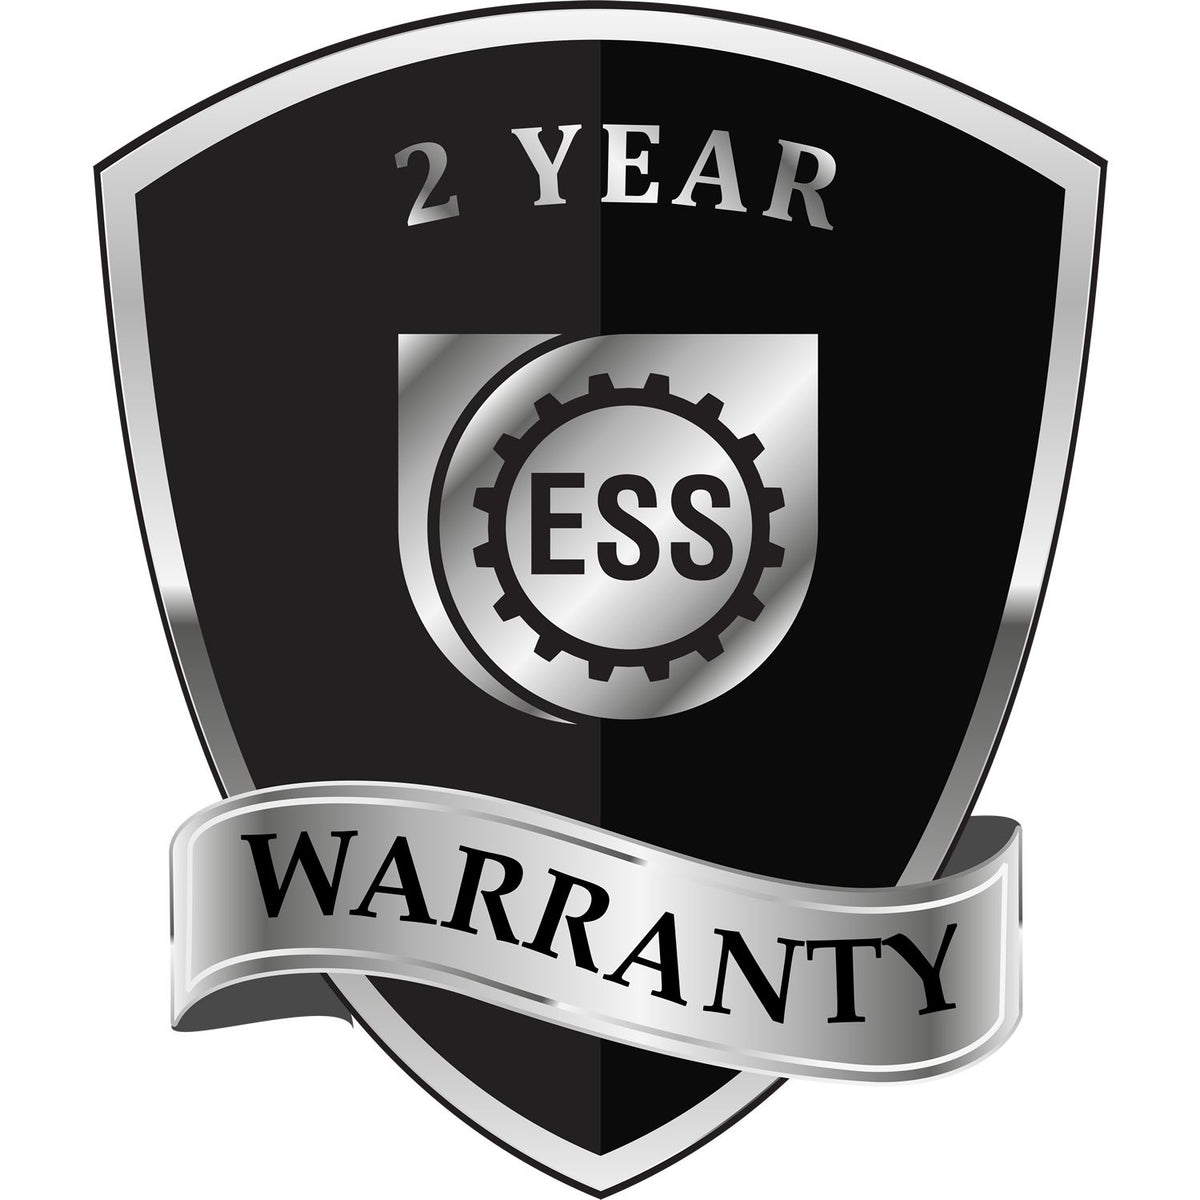 A badge or emblem showing a warranty icon for the Long Reach Missouri PE Seal